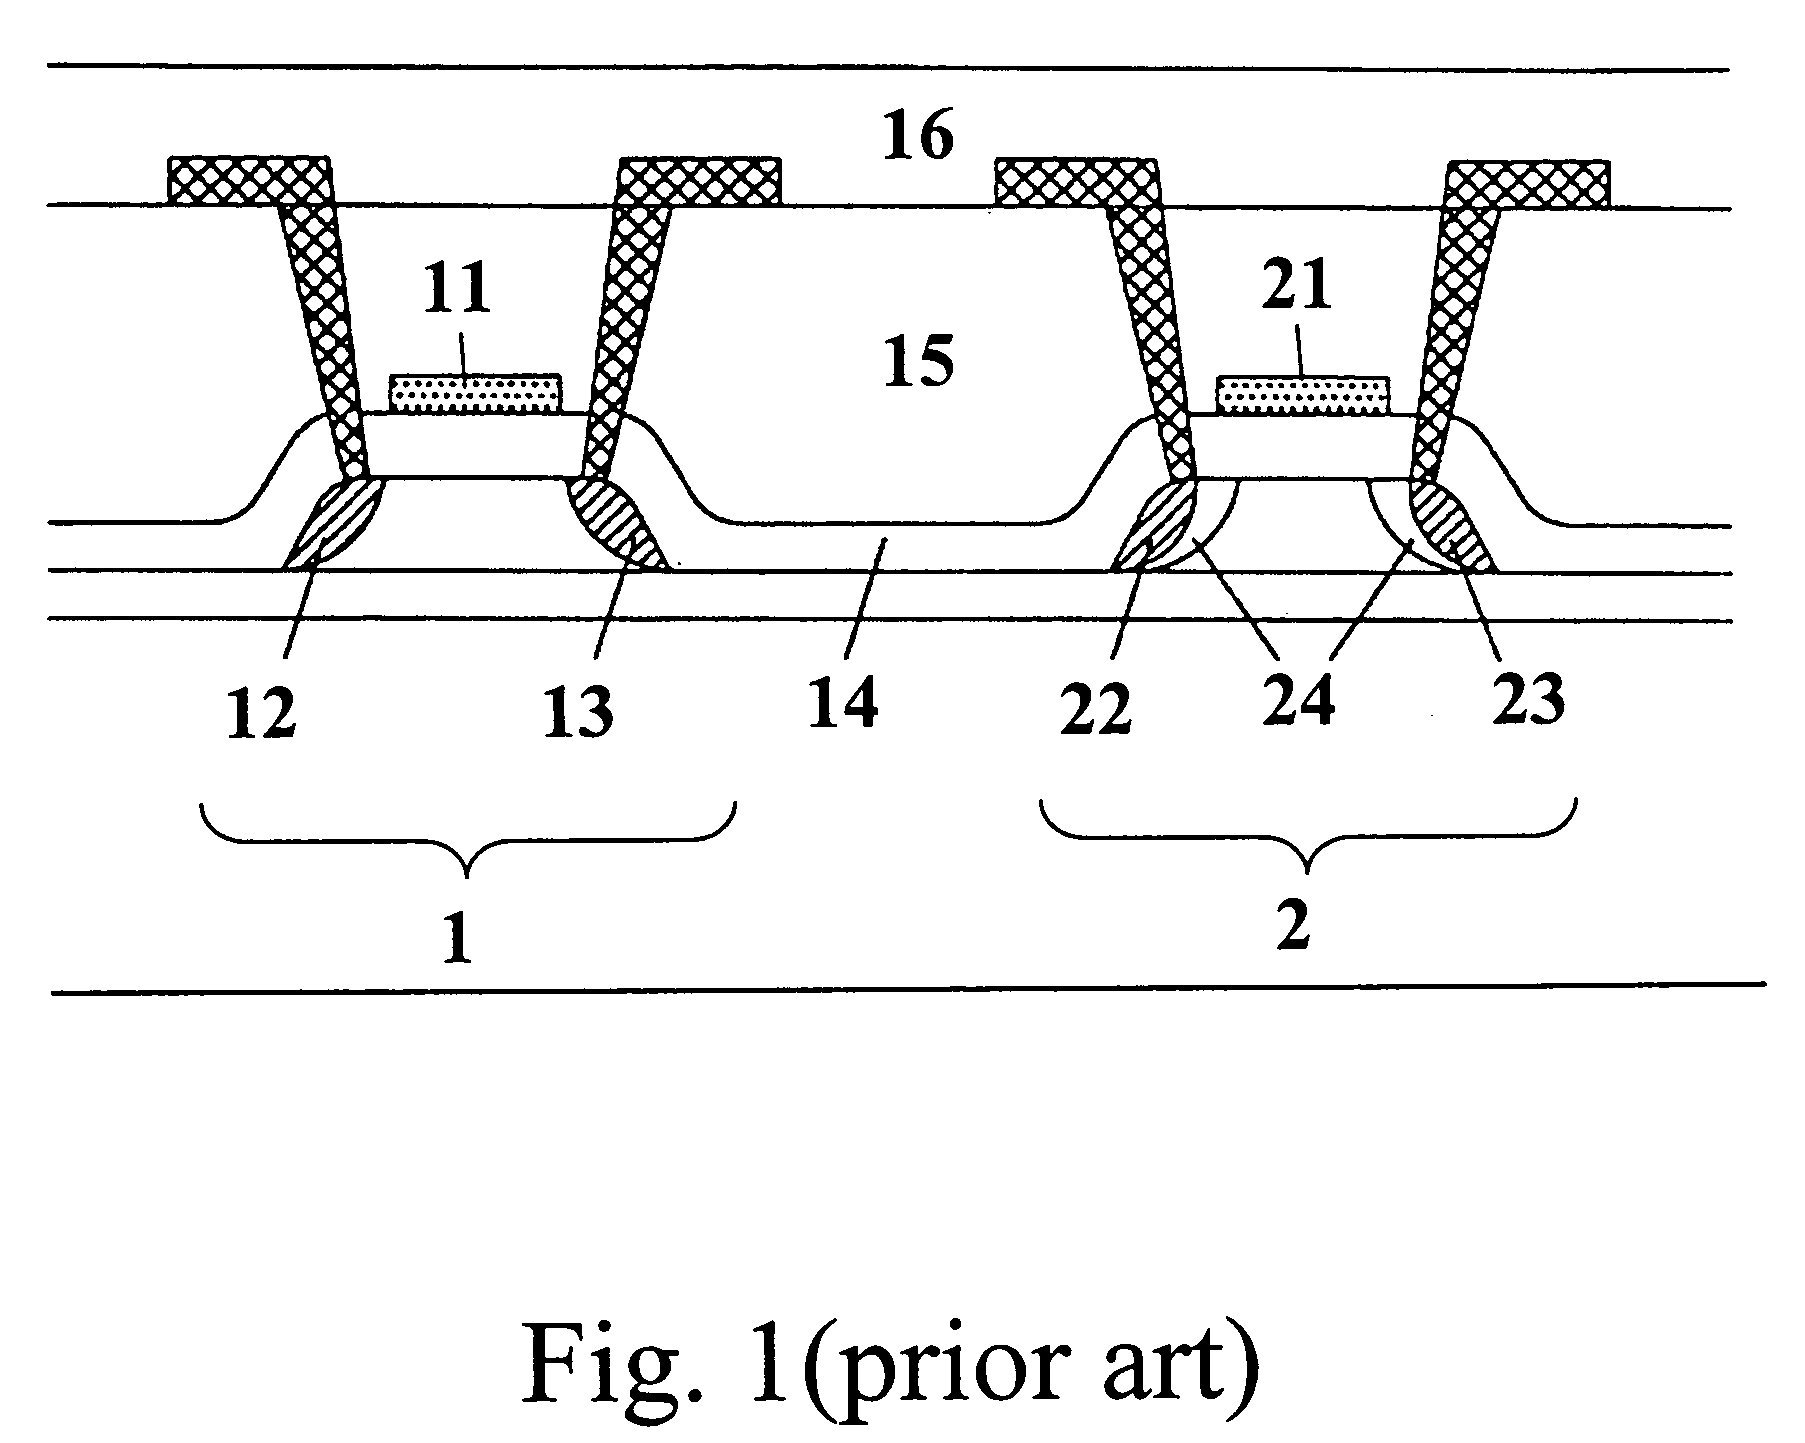 Thin film transistor with self-aligned intra-gate electrode